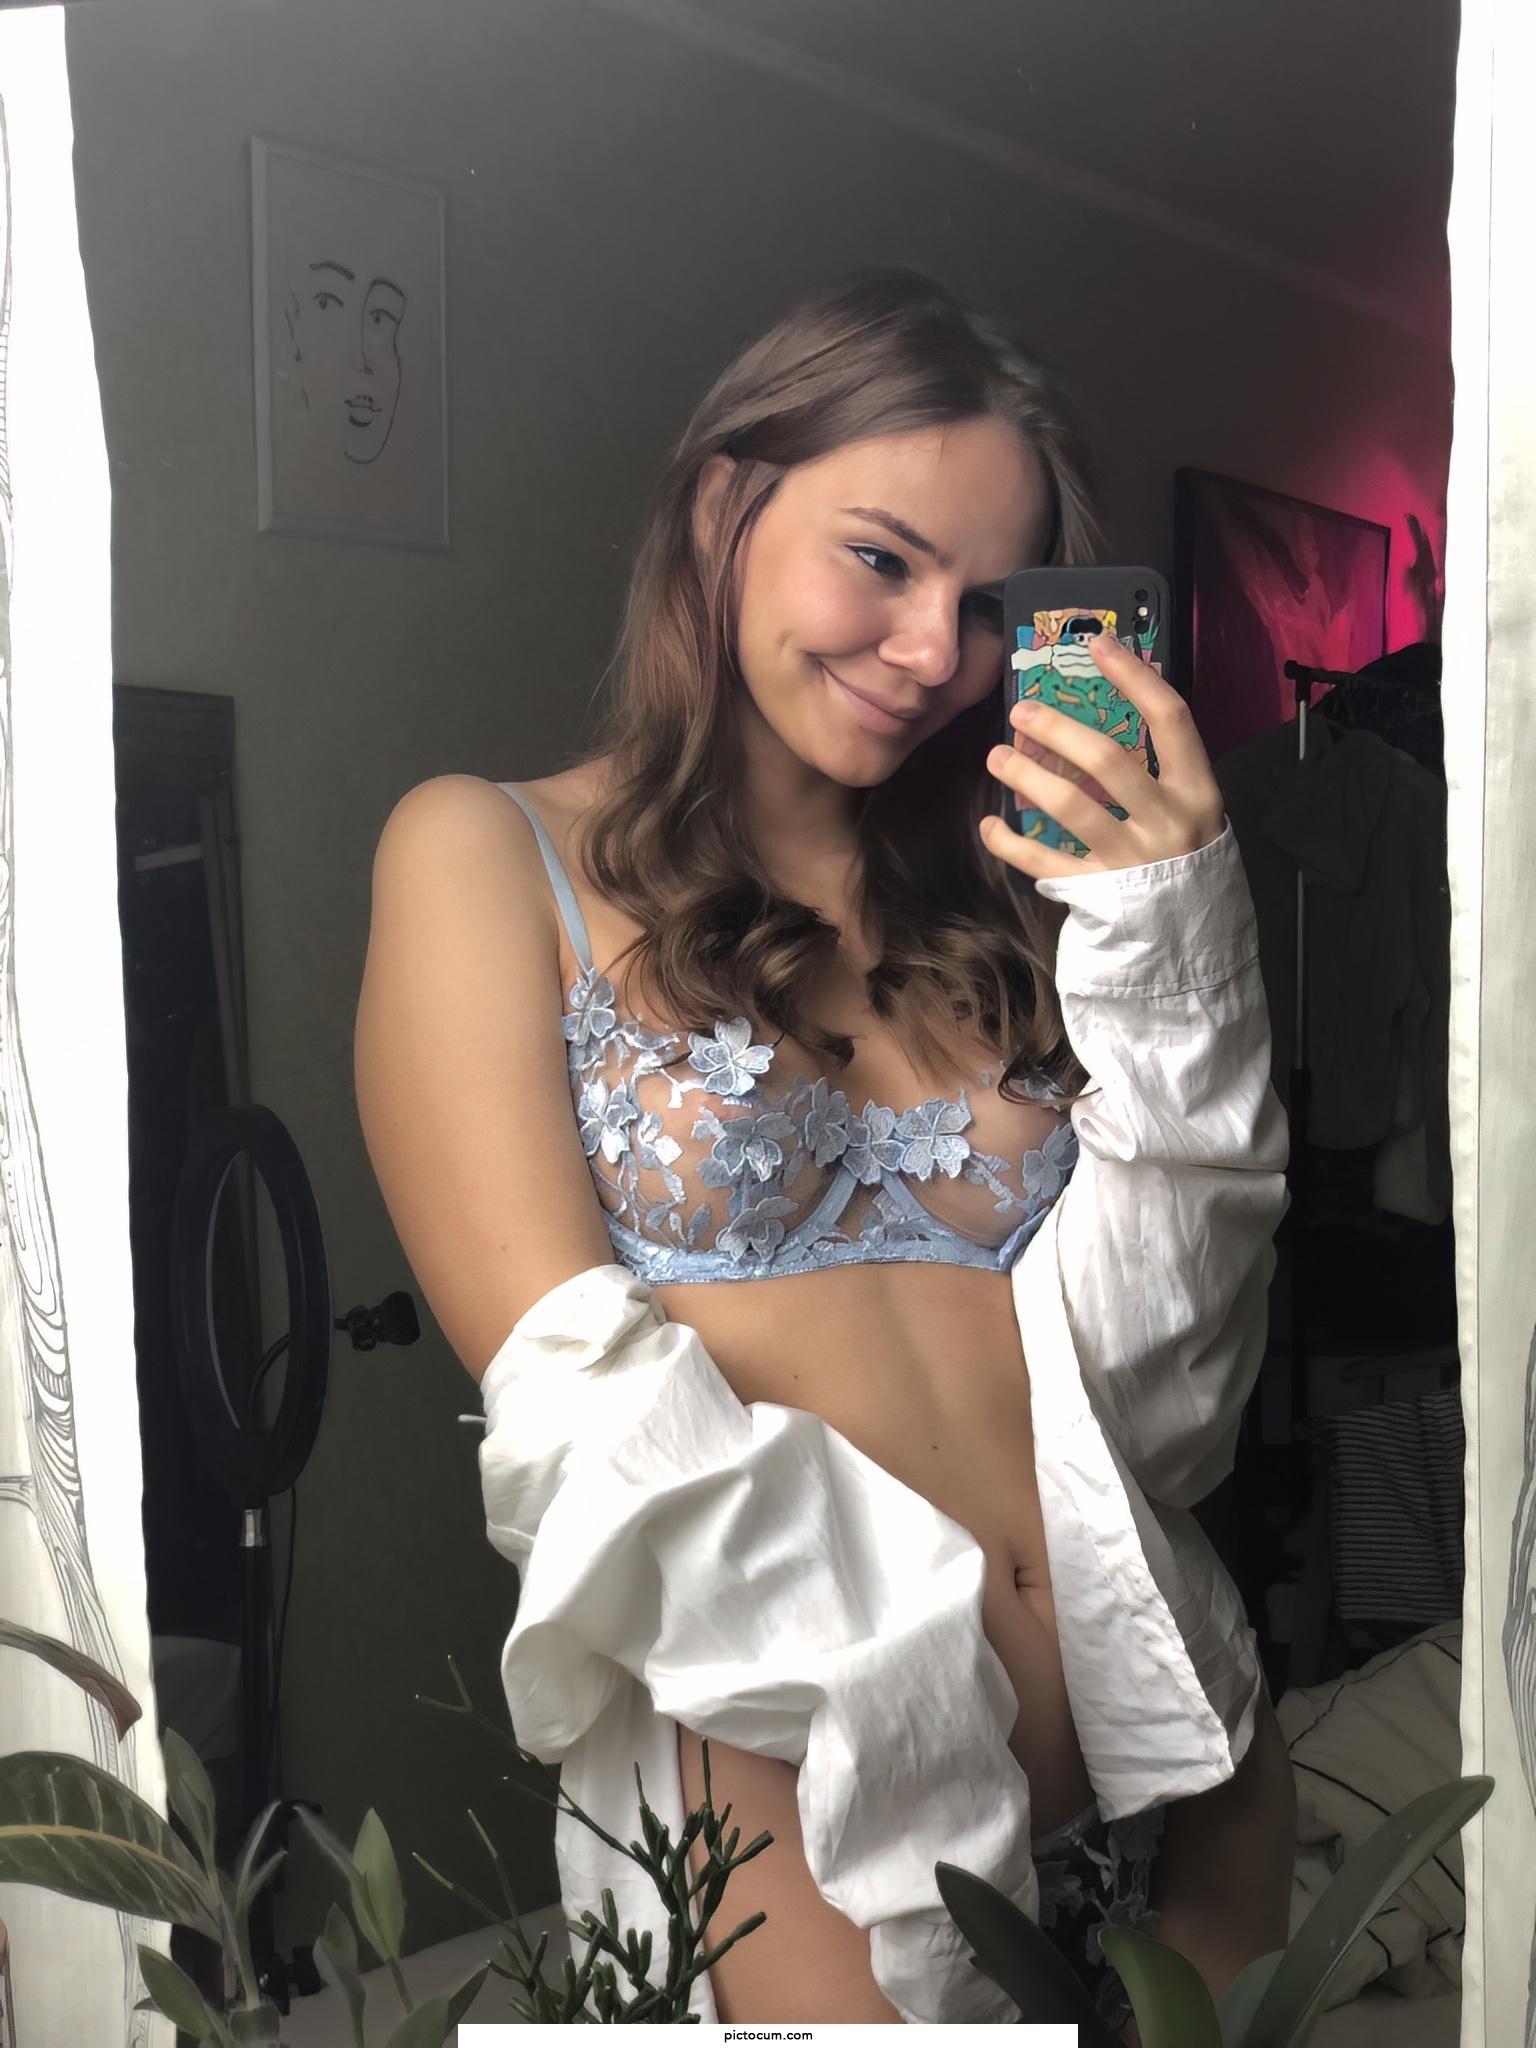 I want you to see my new sexy bra